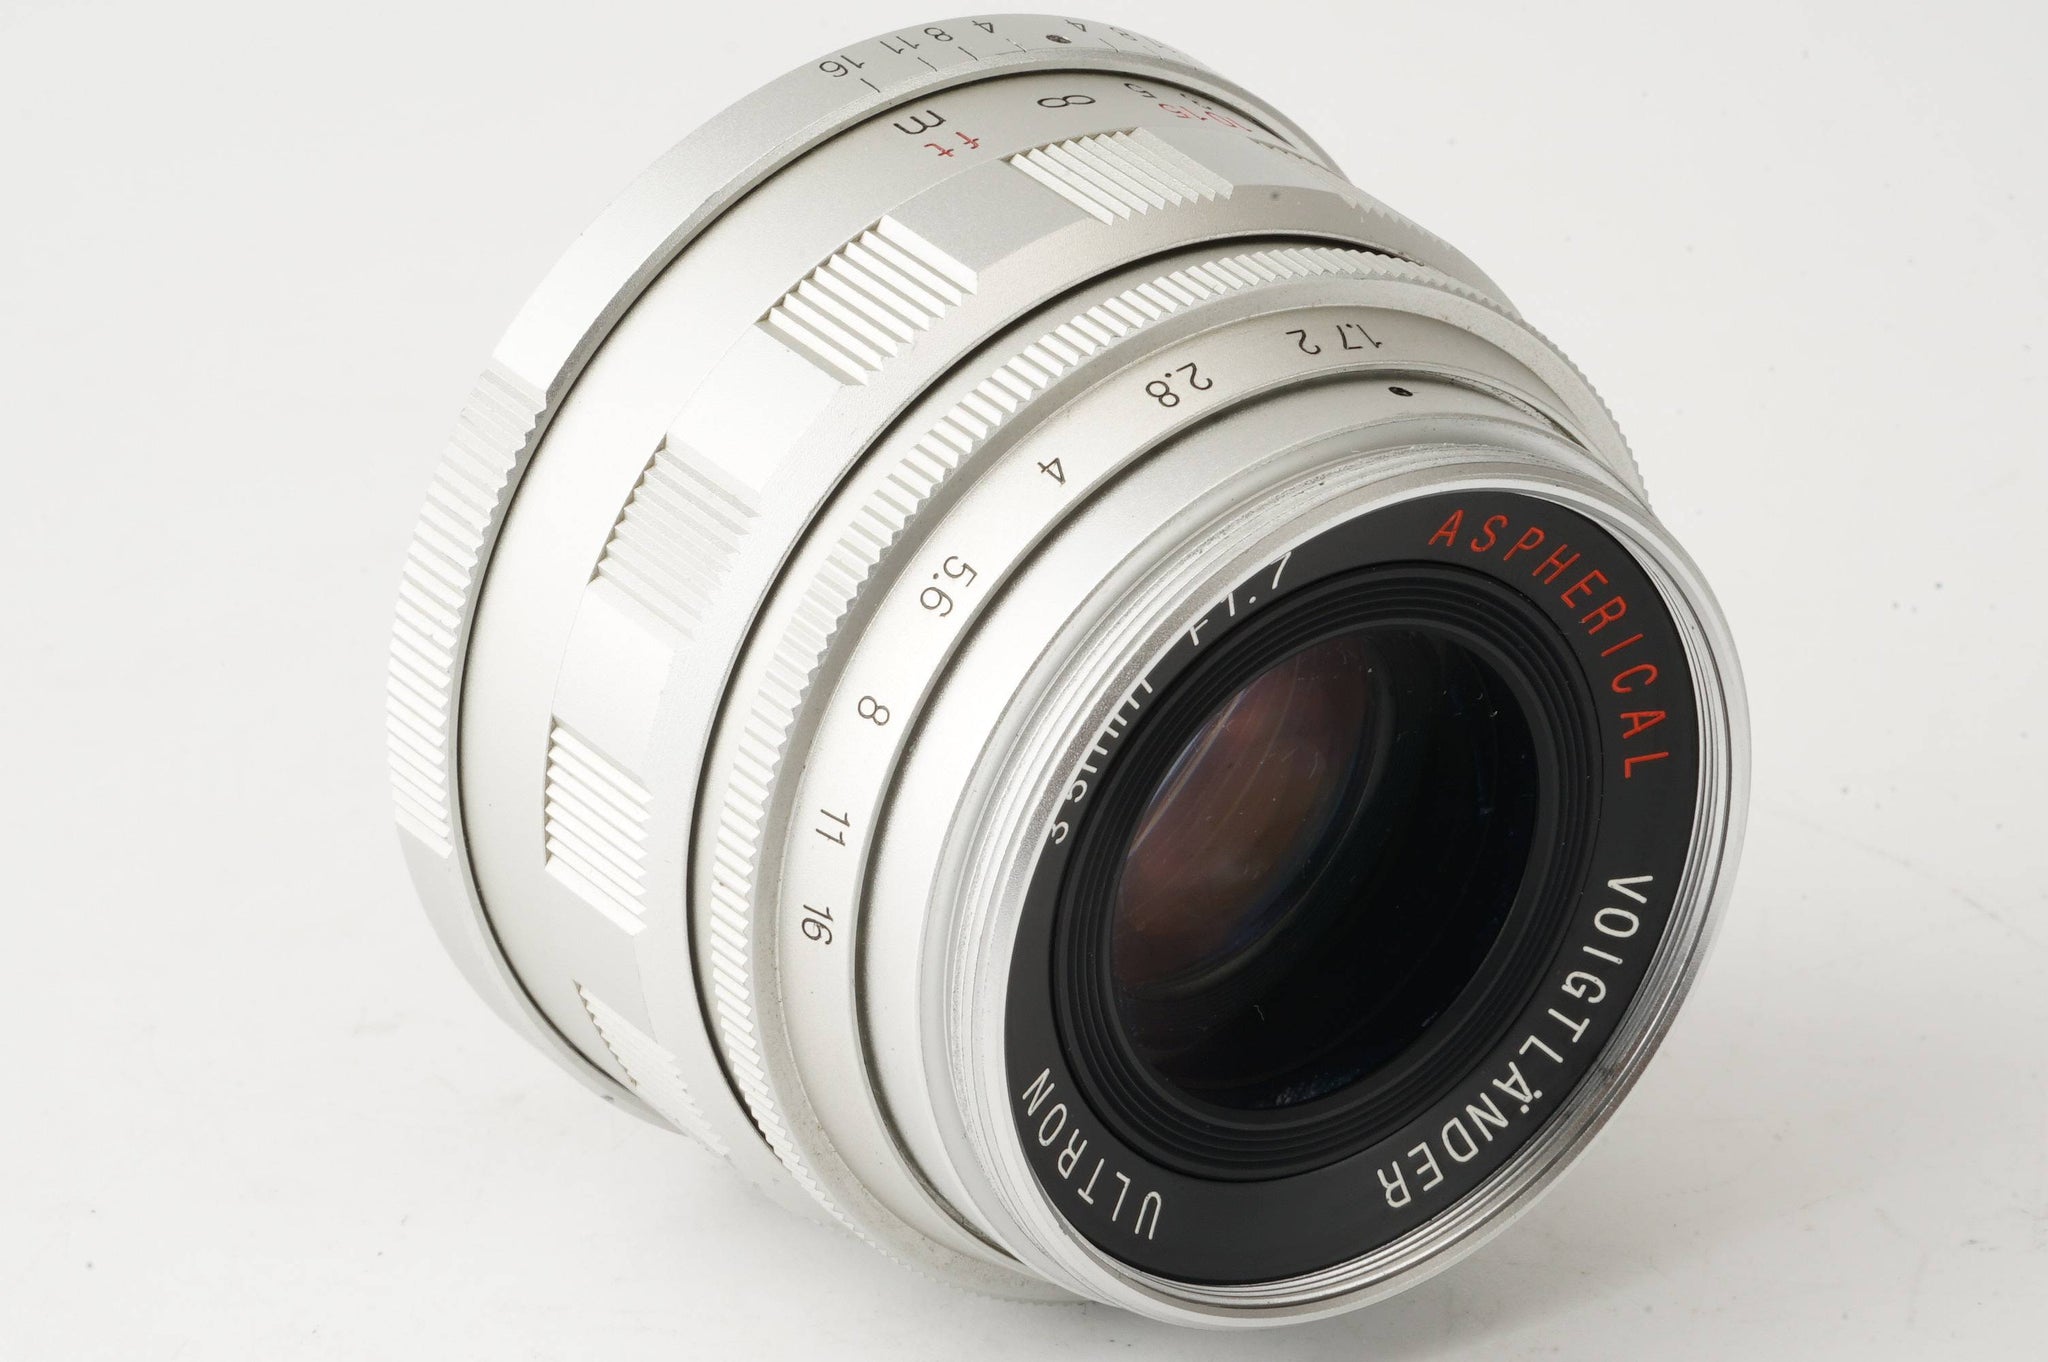 VOIGTLANDER ULTRON 35 1.7 ASPHERICAL L初期不良のみ対応させて頂ます